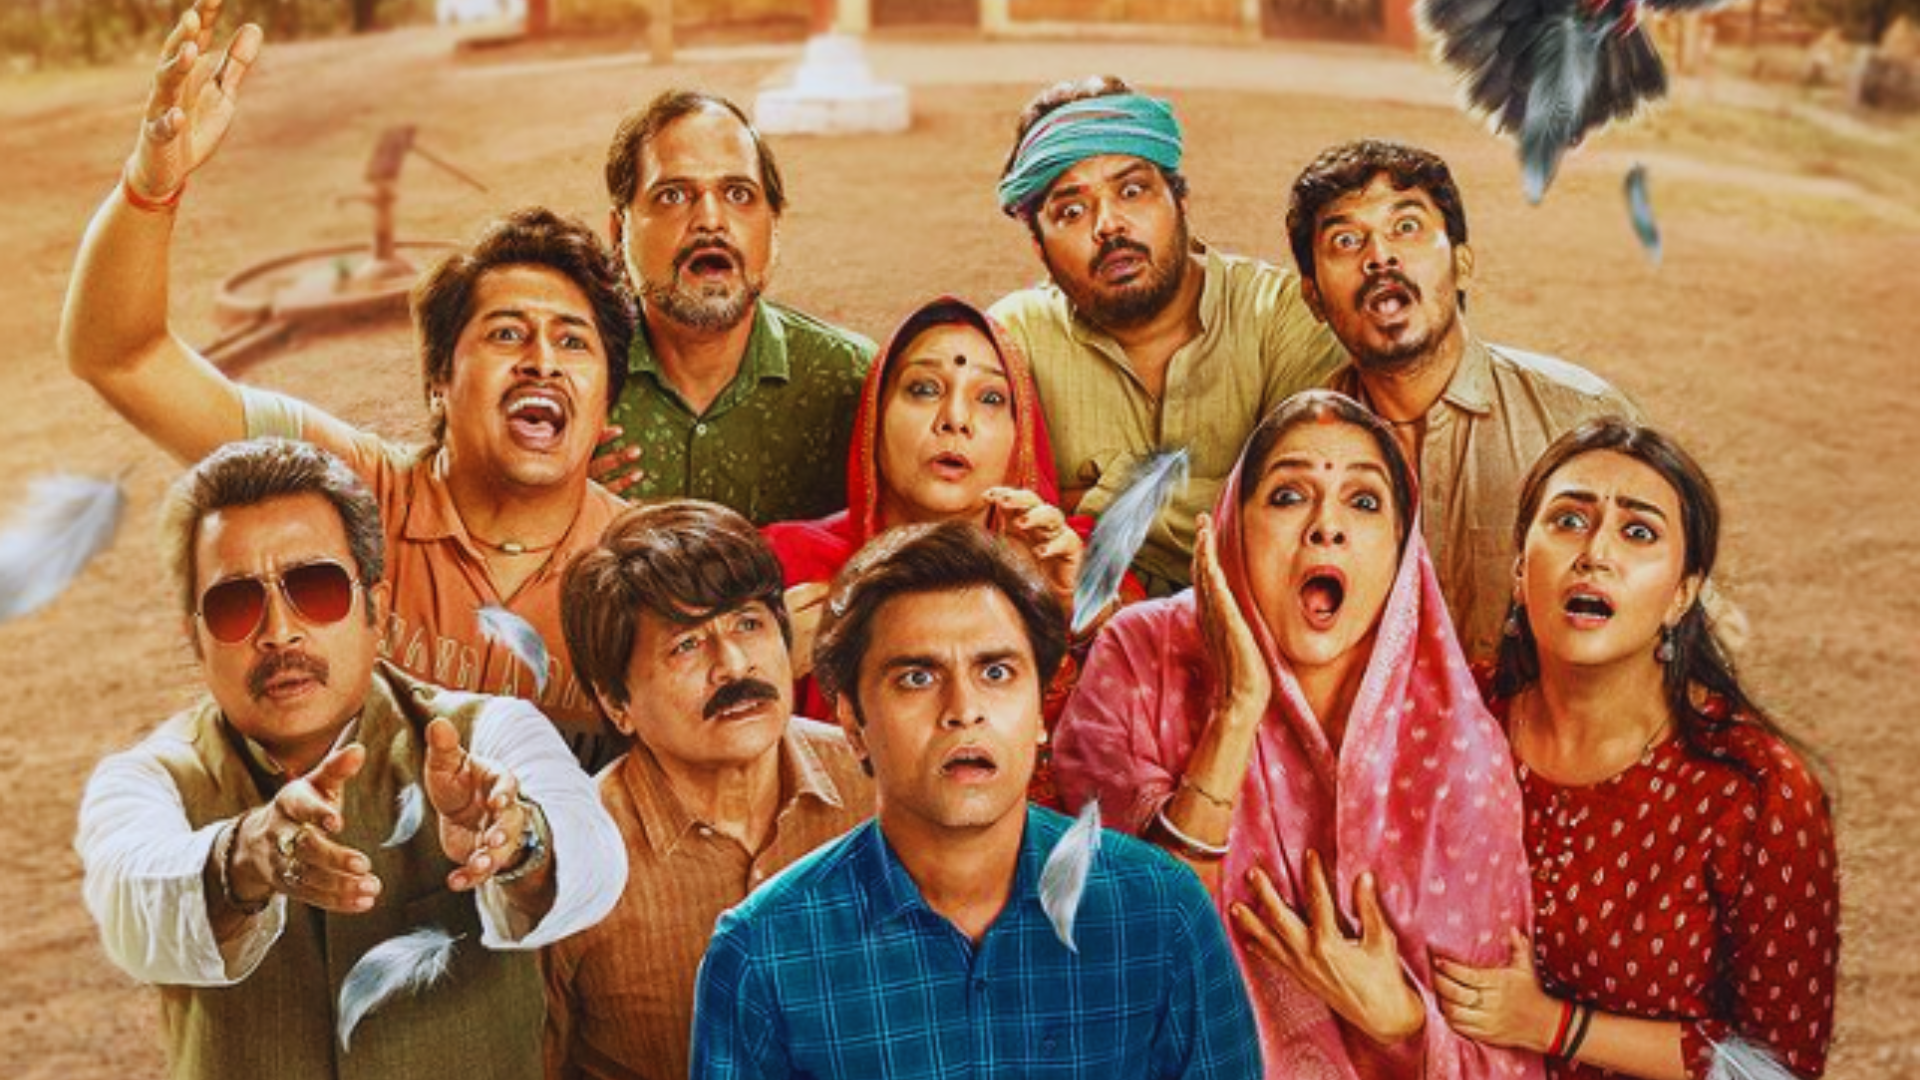 Panchayat Season 3 Trailer Out : Prepare To Chuckle Your Way Through